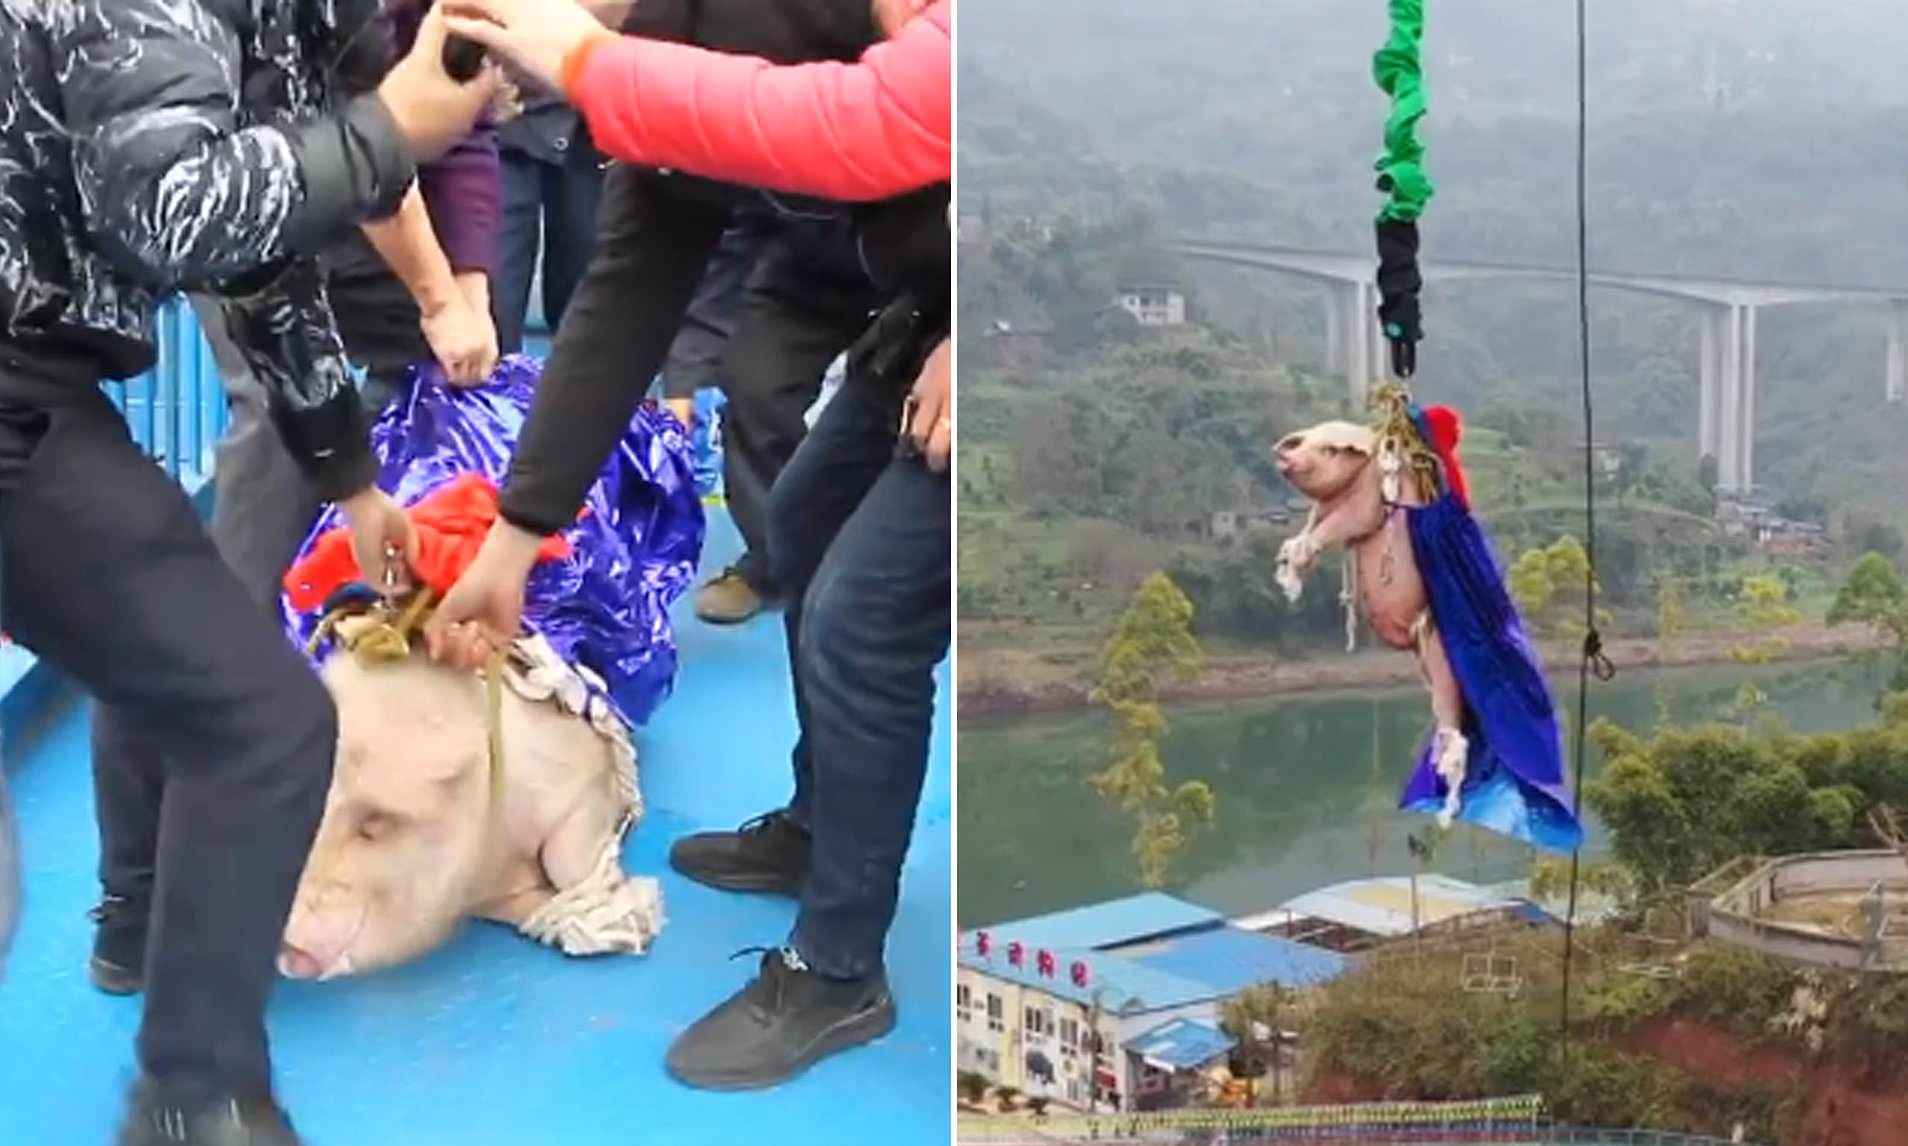 People forcefully pulling the pig; pig tied for bungee jumping in China